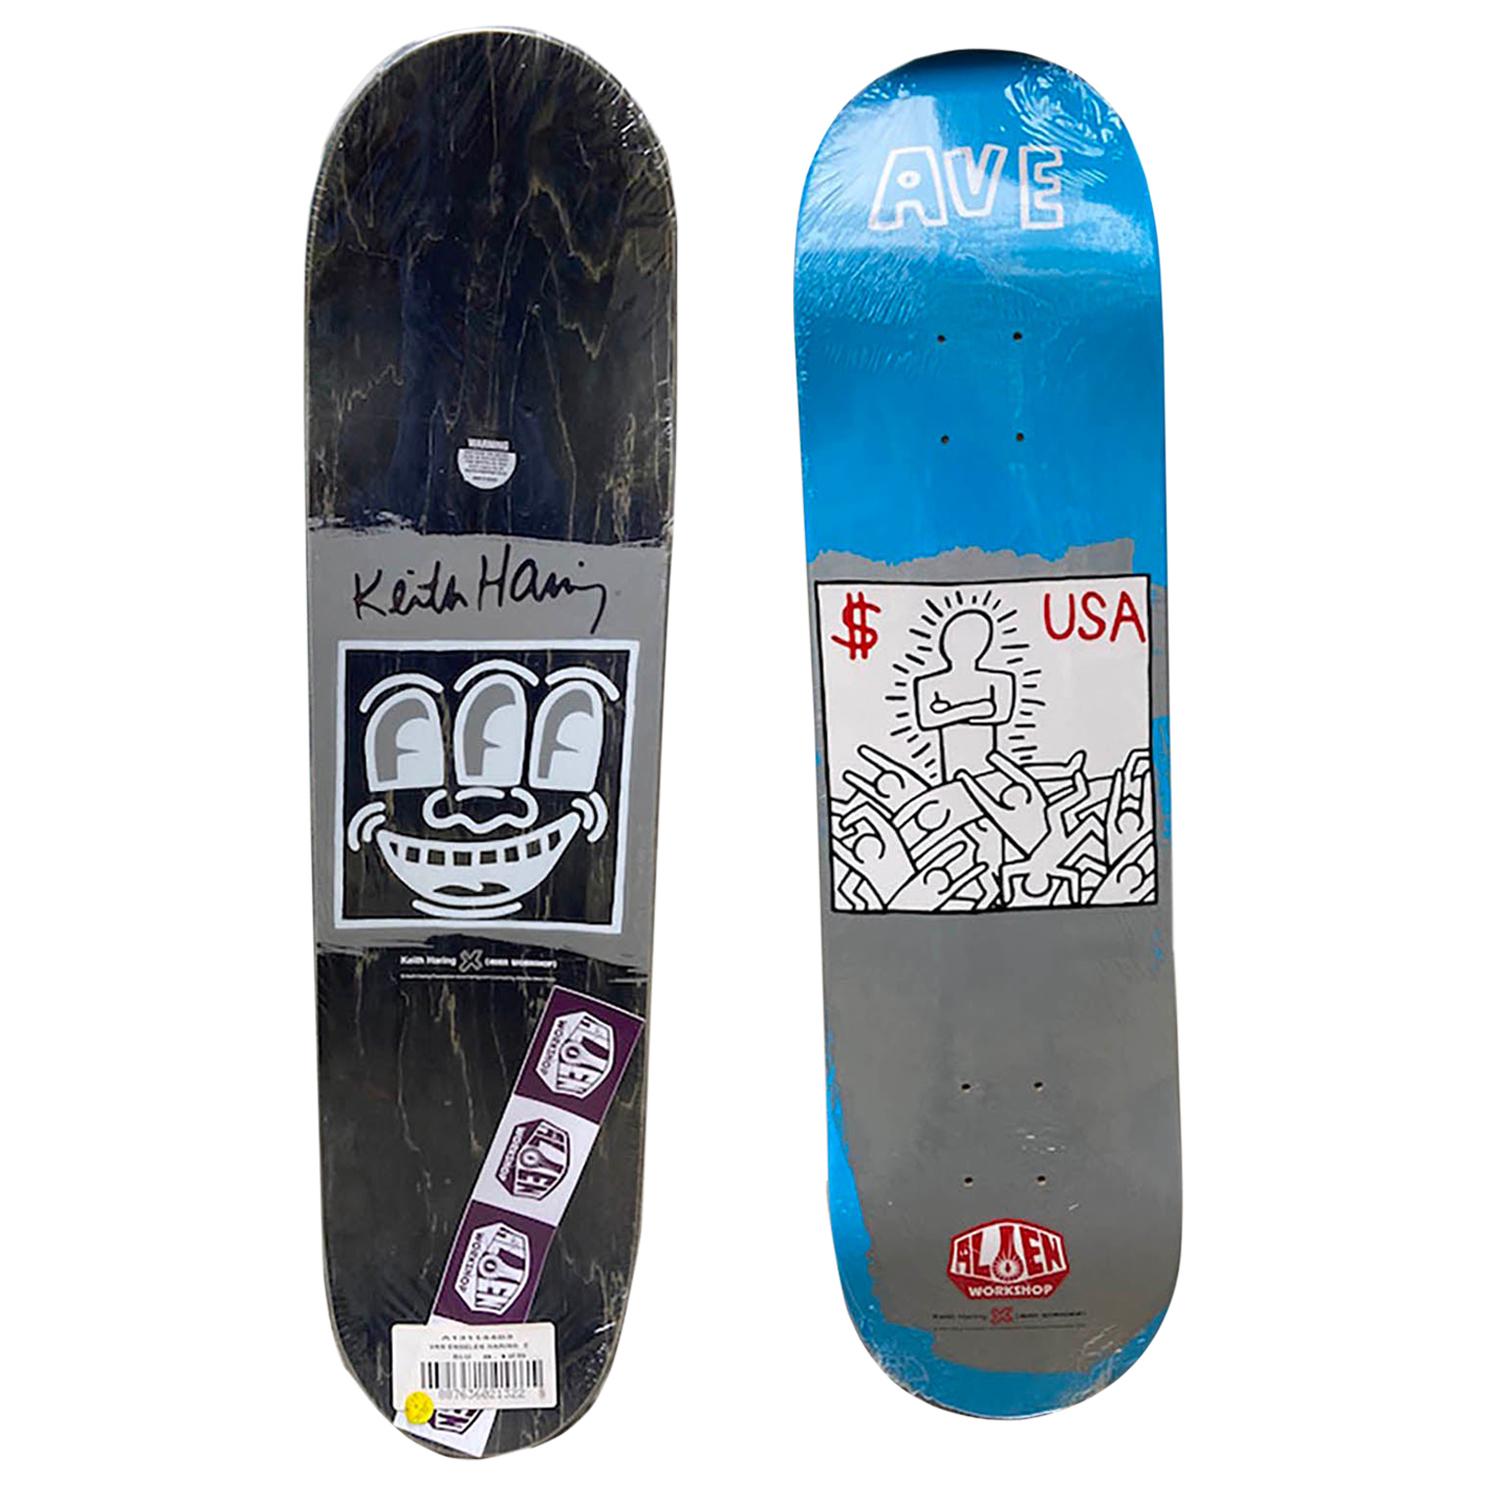 Keith Haring, AVE Skate Board Collector